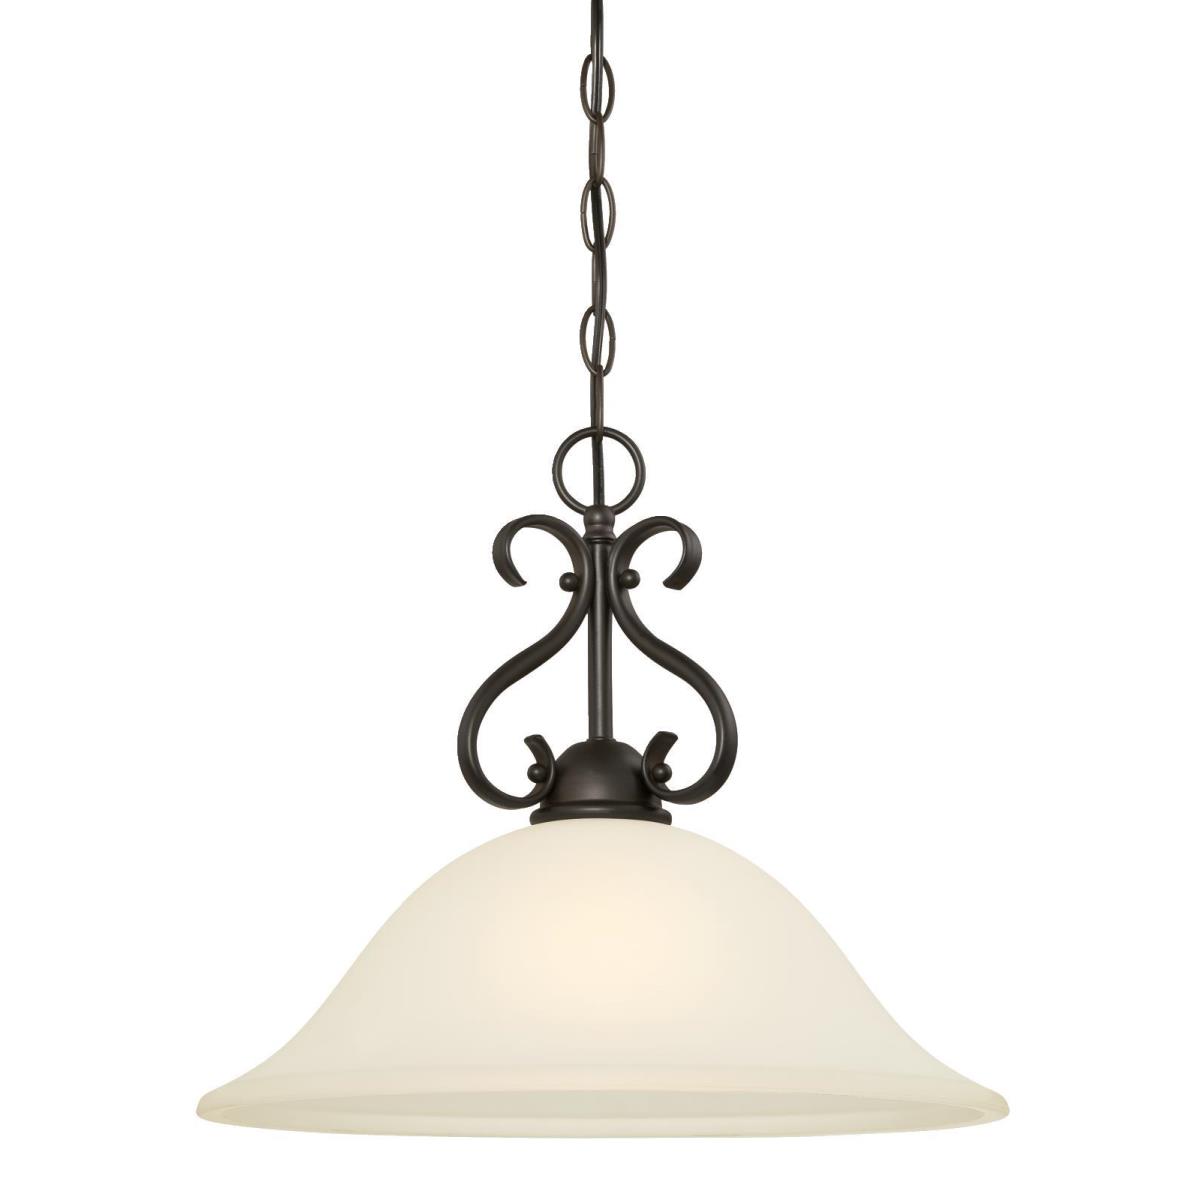 1 Light Pendant Oil Rubbed Bronze Finish with Frosted Glass